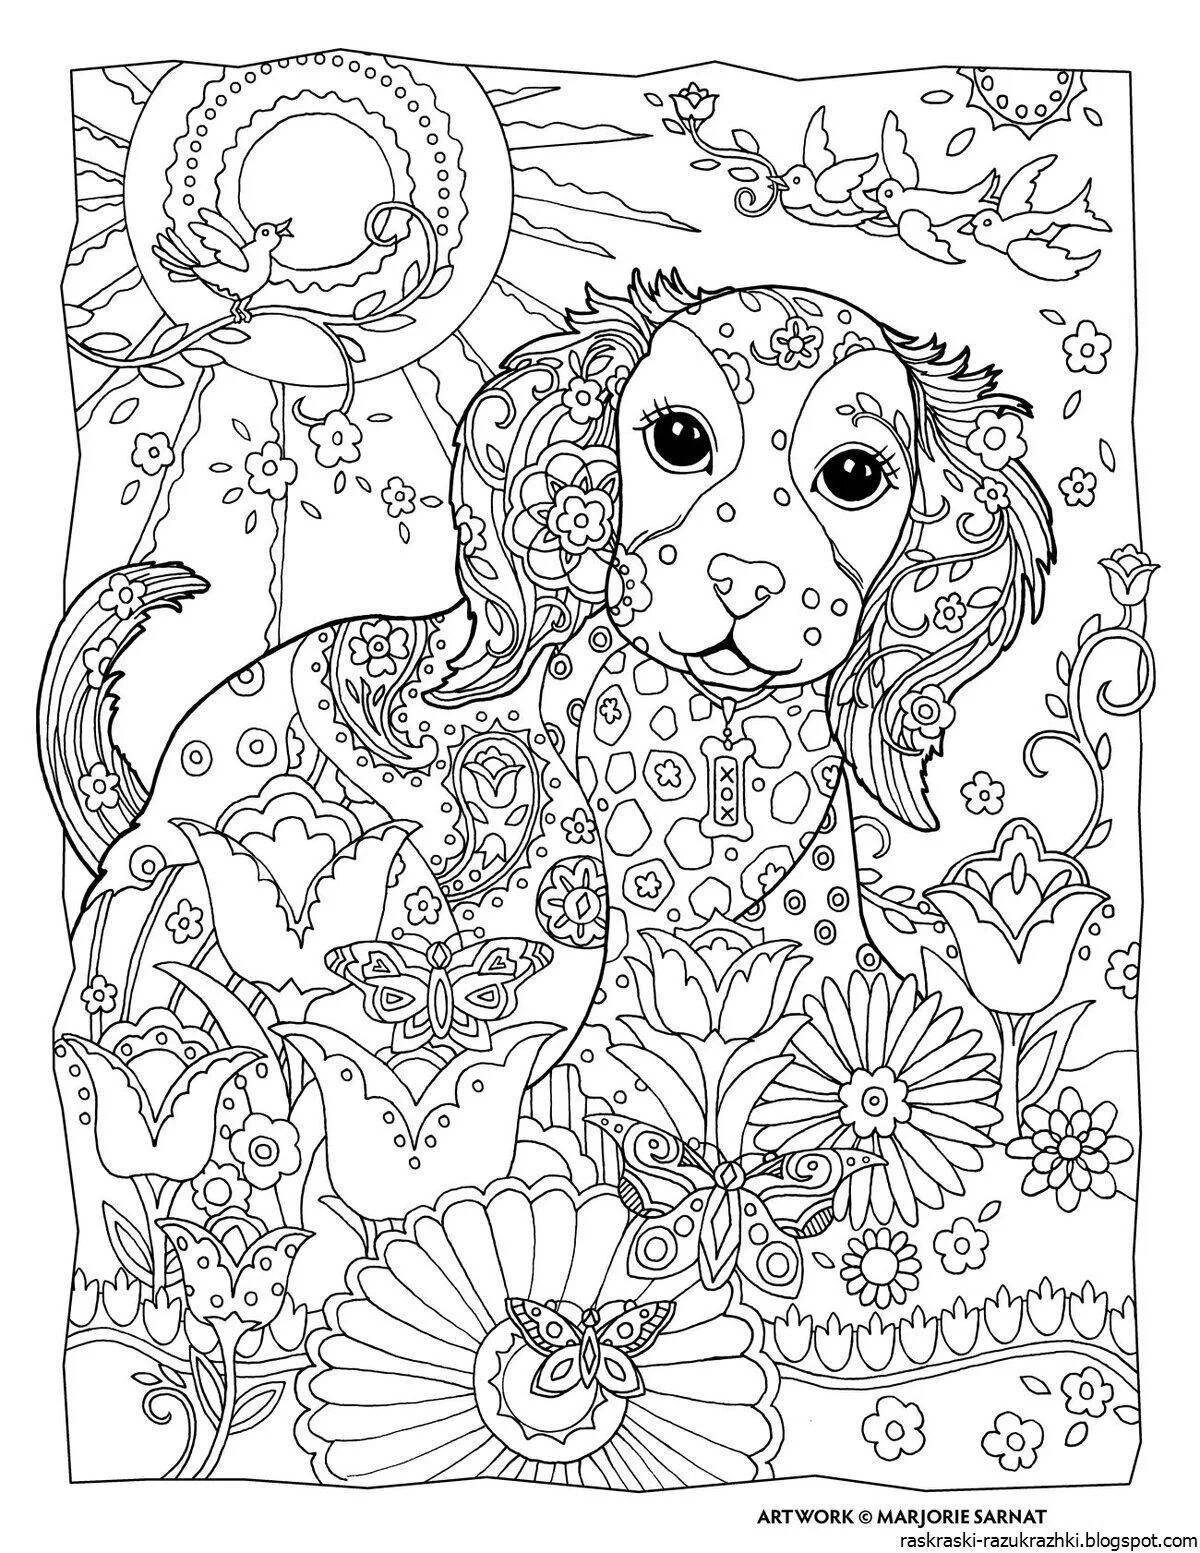 Charming coloring book for girls 7 years old